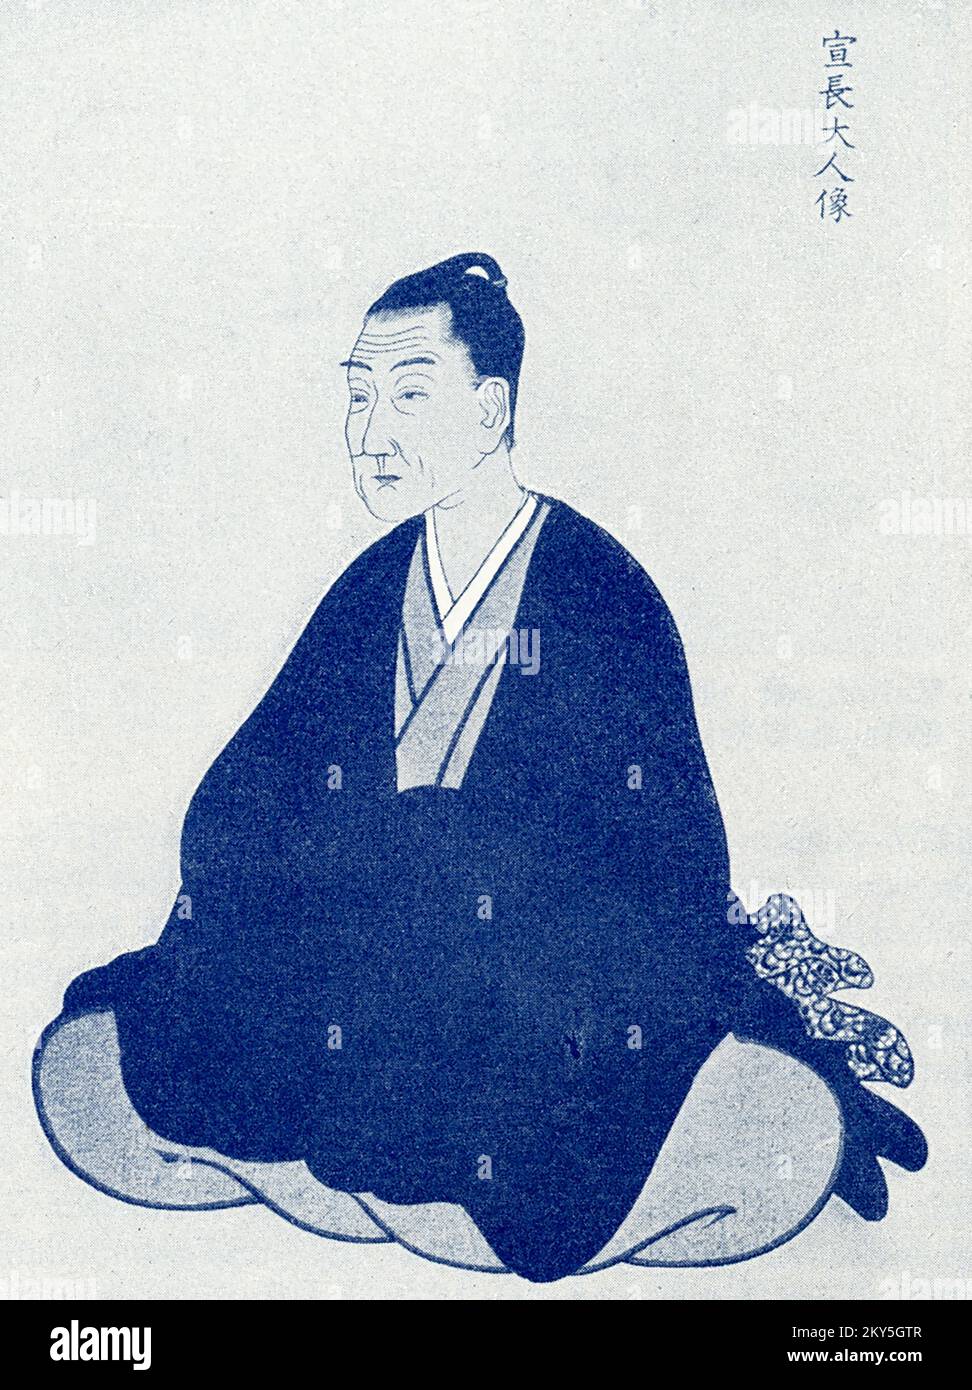 This image shows: “Norinaga Motoori. From a portrait kept by a family member.” Motoori Norinaga (1730 –1801) was a scholar on Japanese classics, a philosopher, and a poet during the time of the Tokugawa Shogunate. Stock Photo